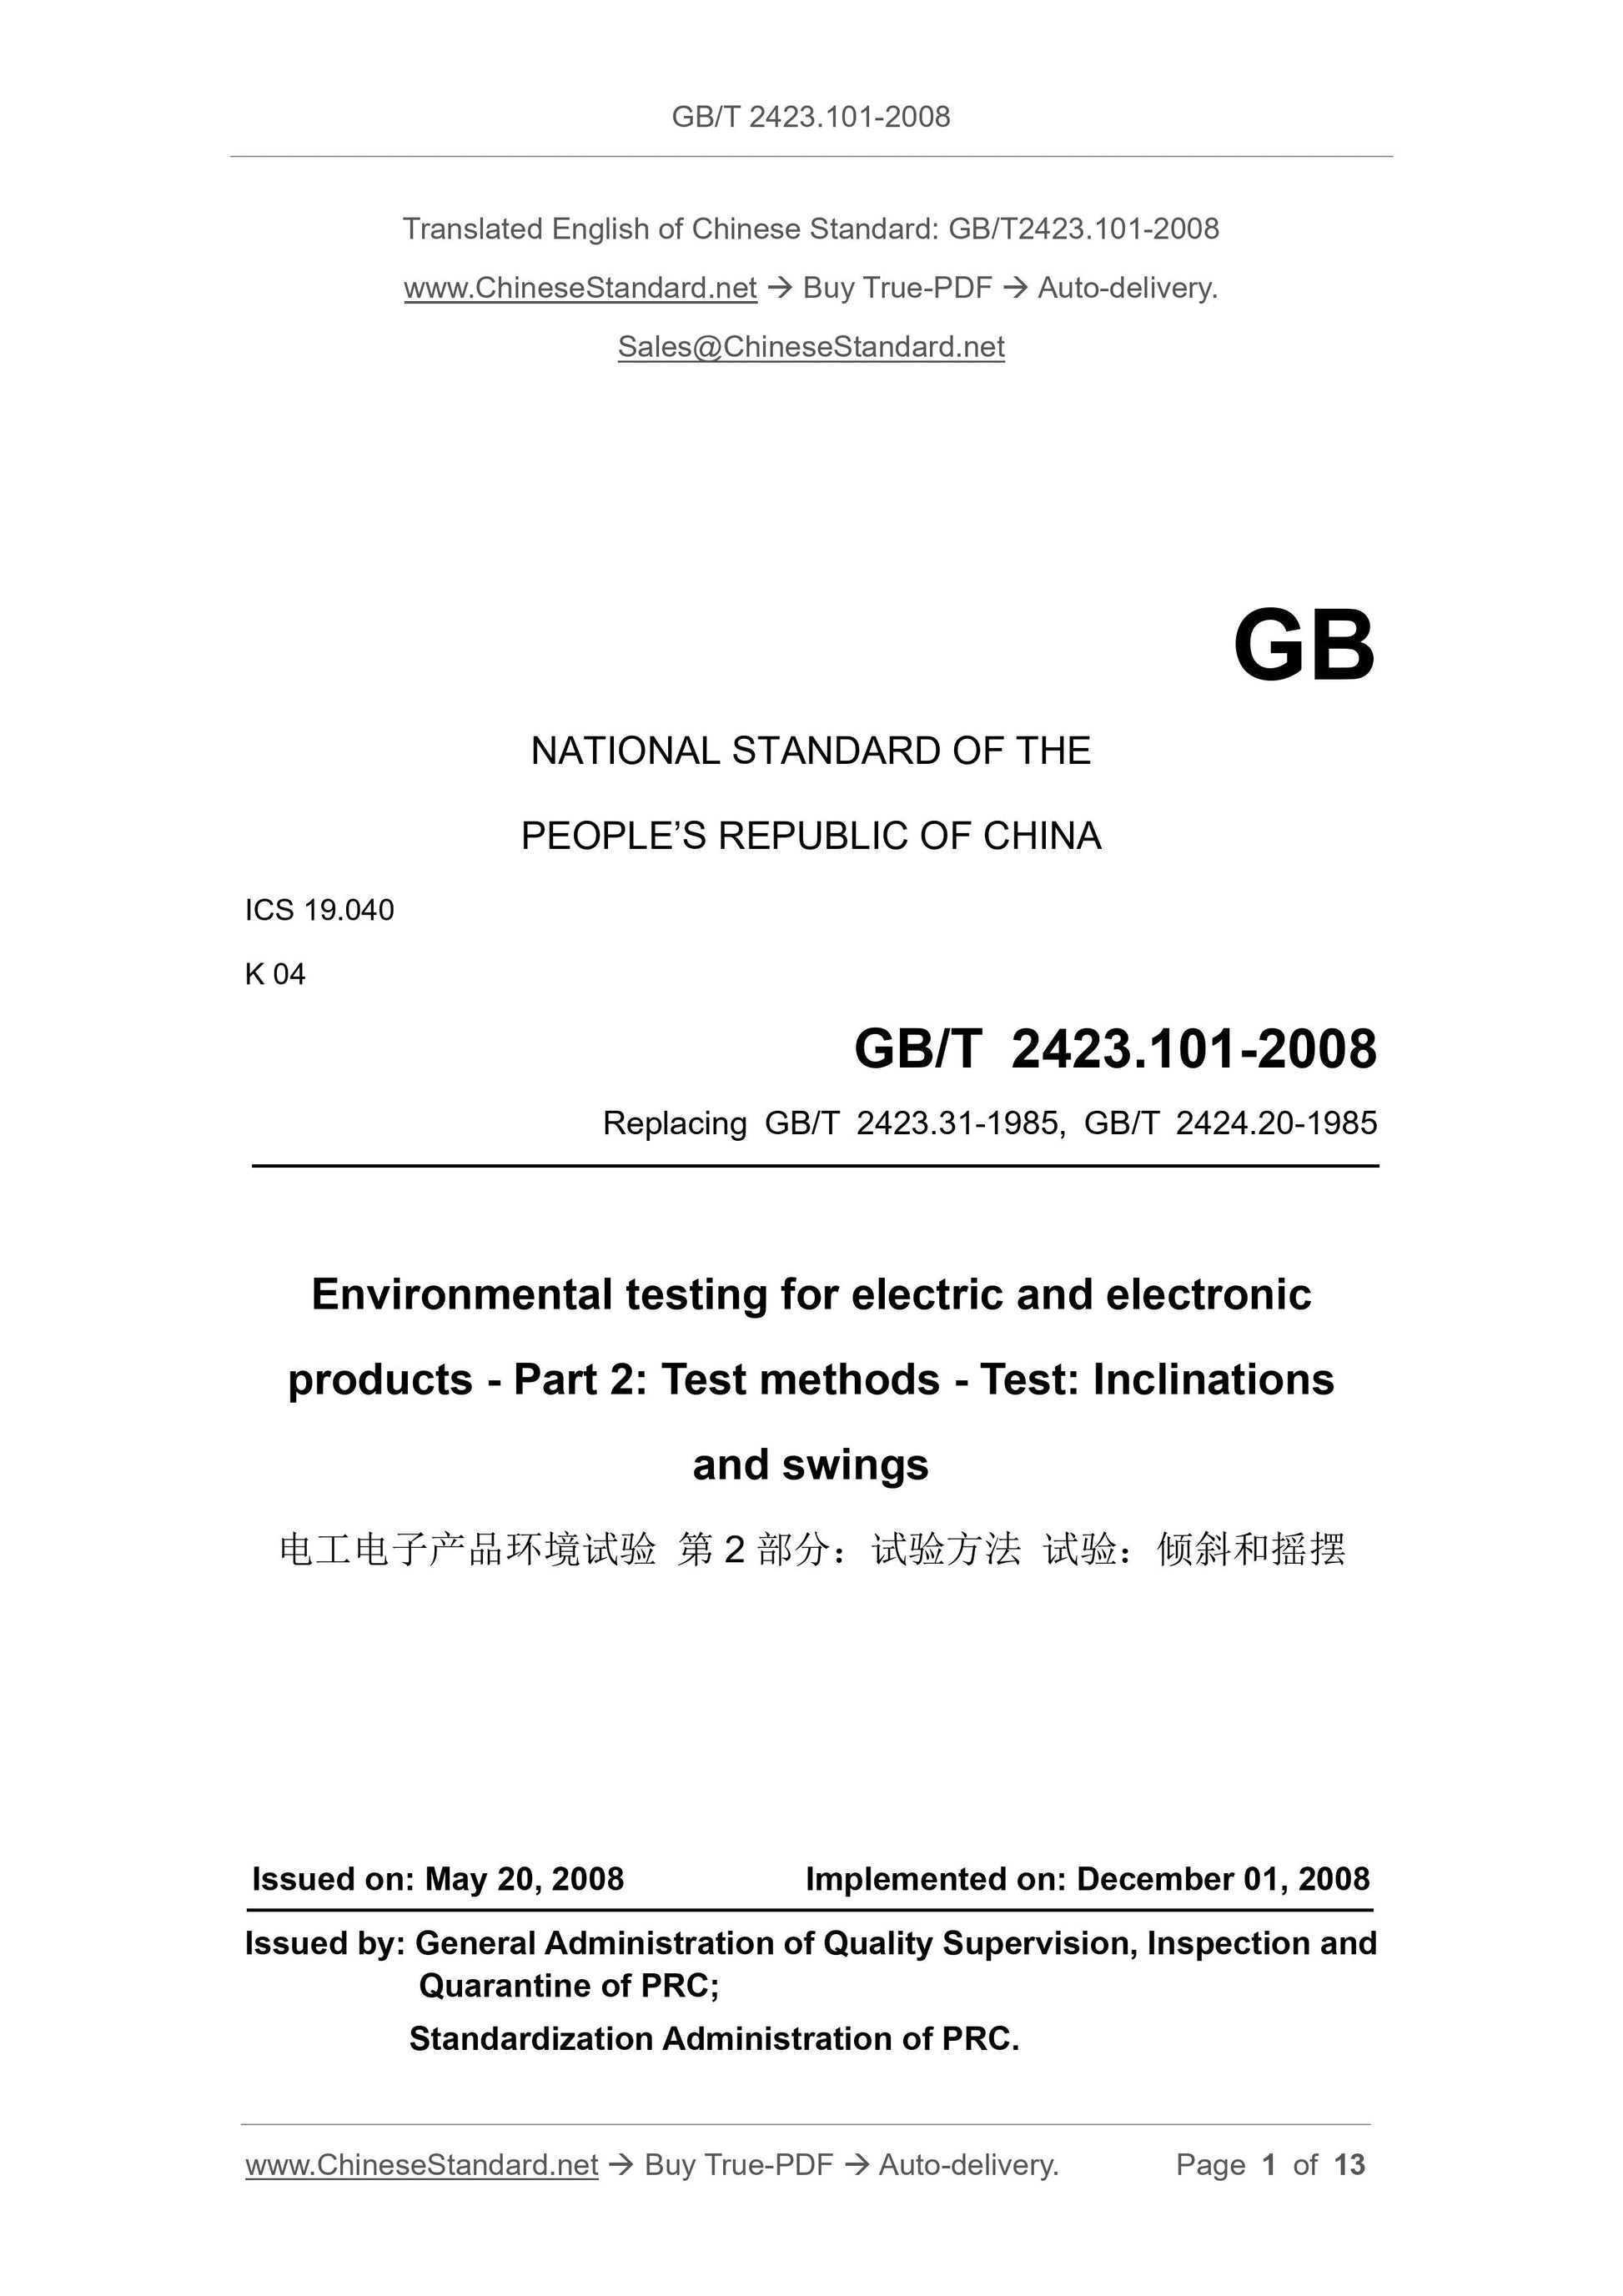 GB/T 2423.101-2008 Page 1